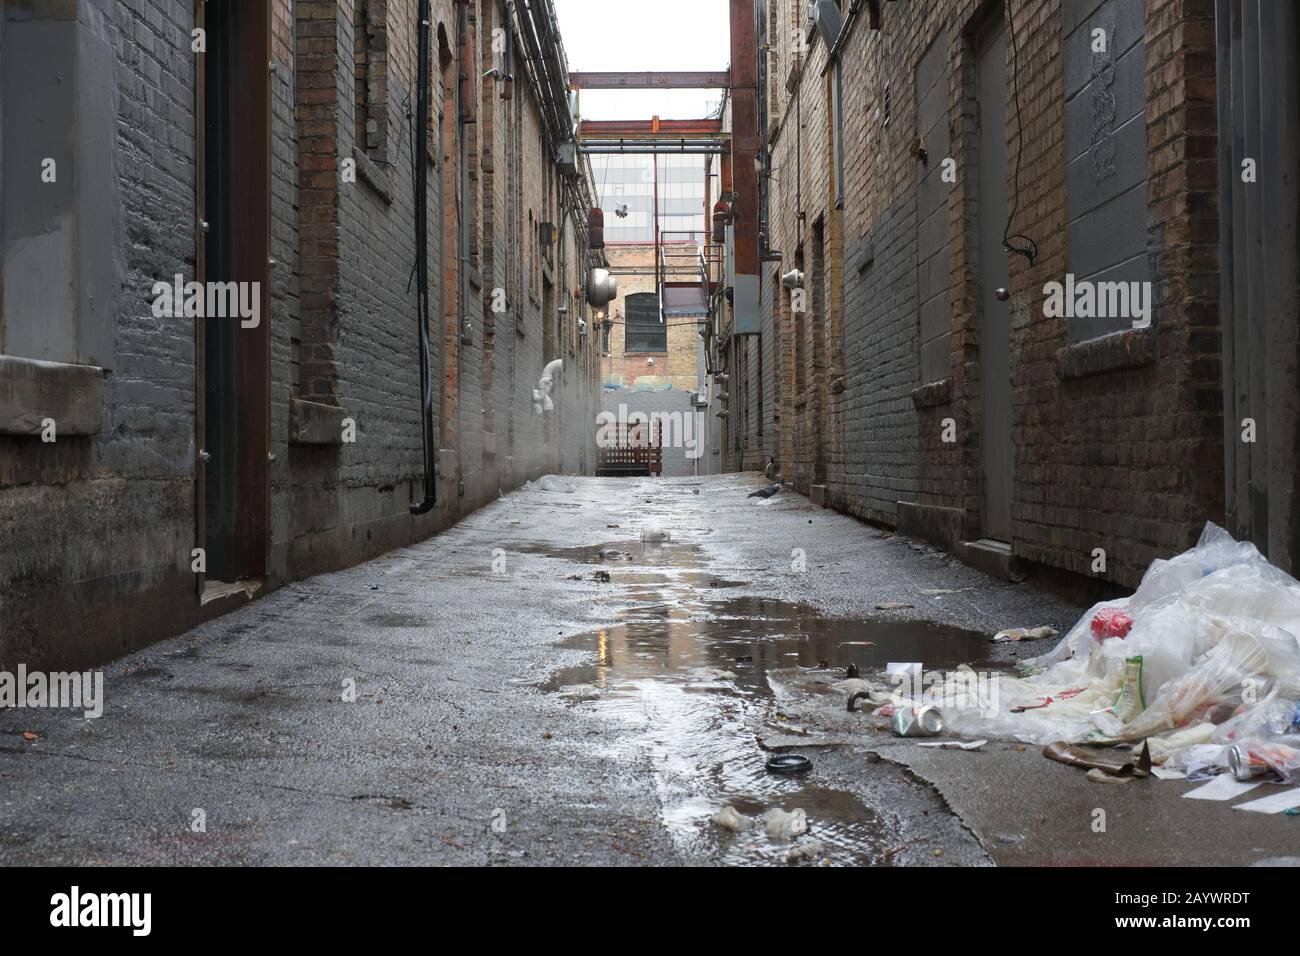 Filthy alley in a rainy urban environment (black and white) Stock Photo